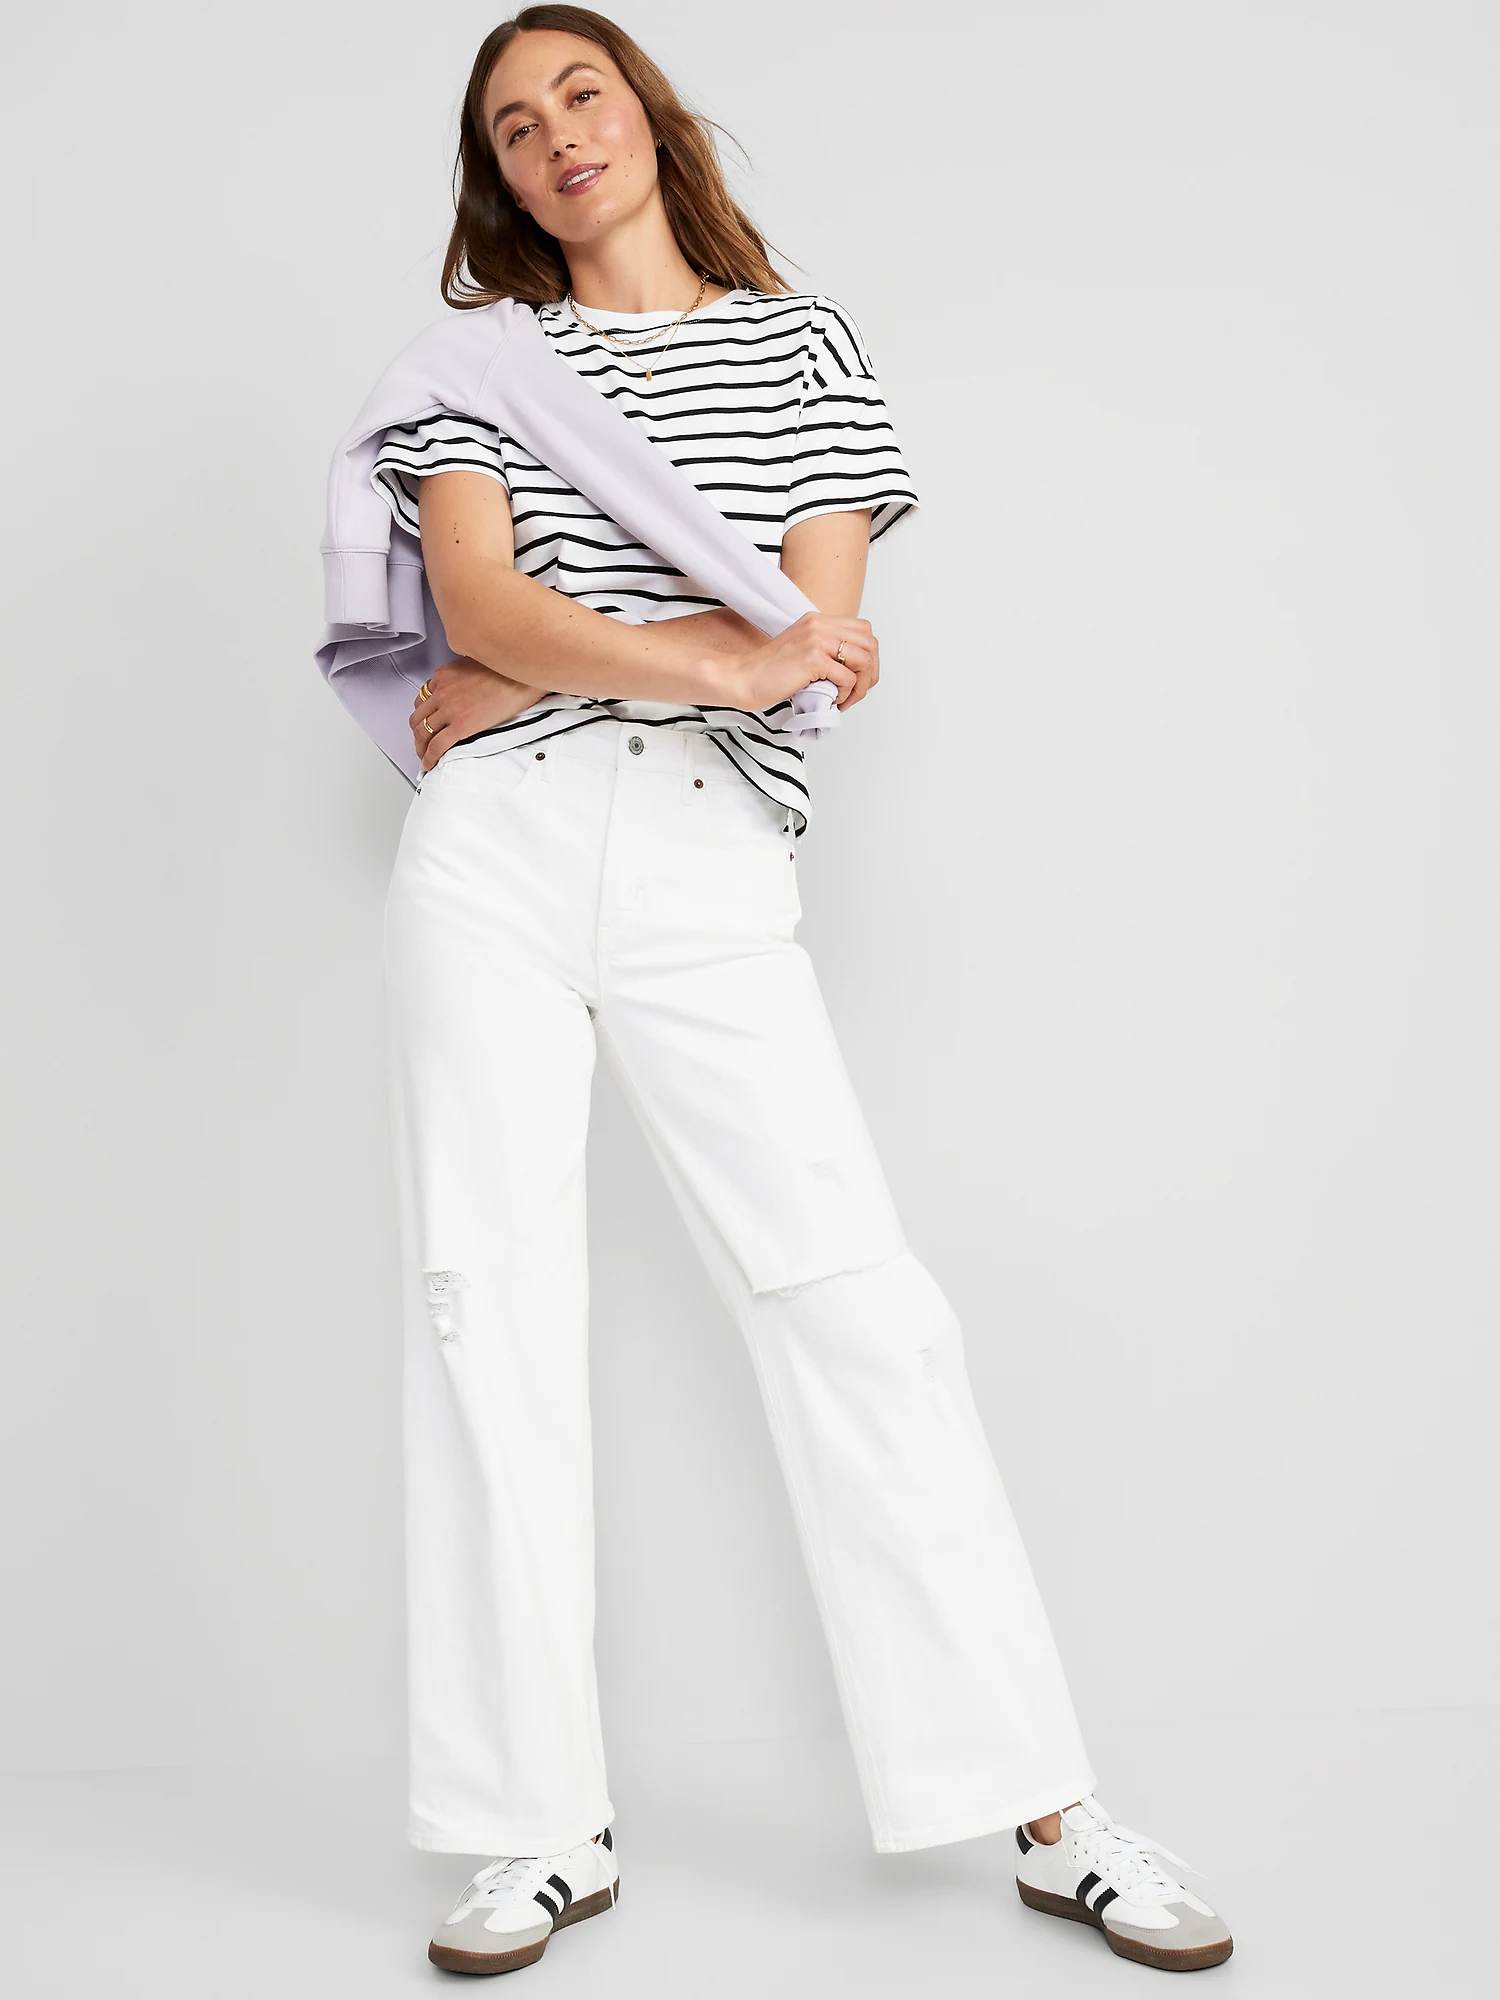 Gap white jeans are a versatile and timeless wardrobe staple, offering a fresh and classic look that can be